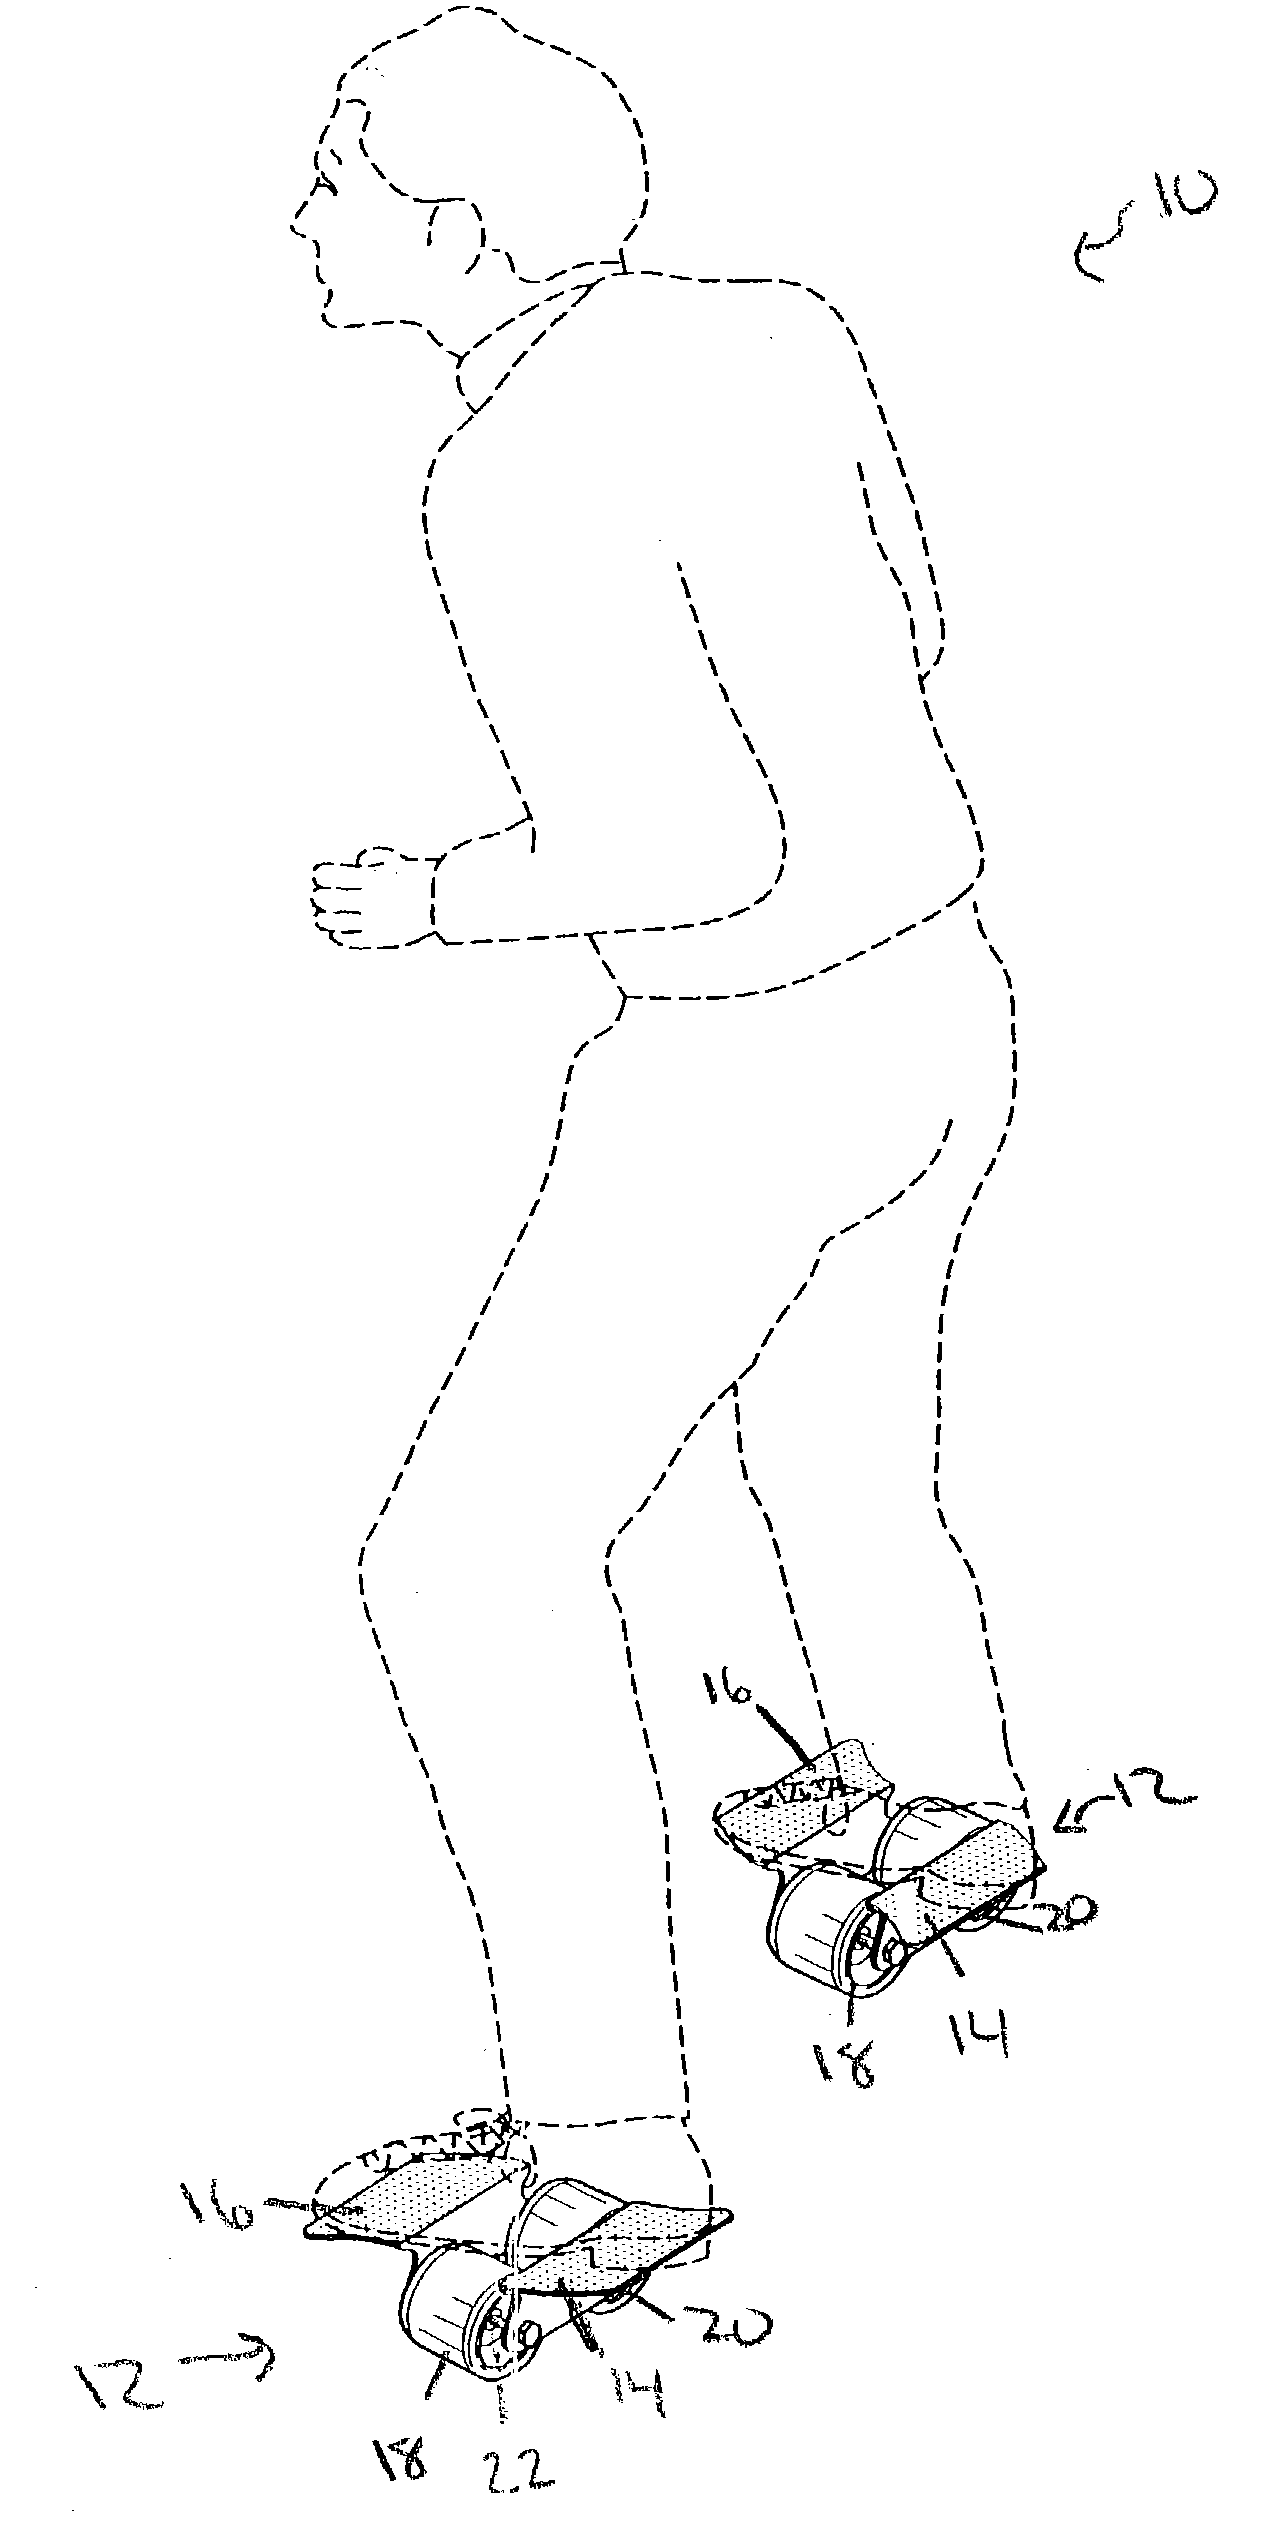 Personal transportation device for supporting a user's foot having multiple transportation attachments